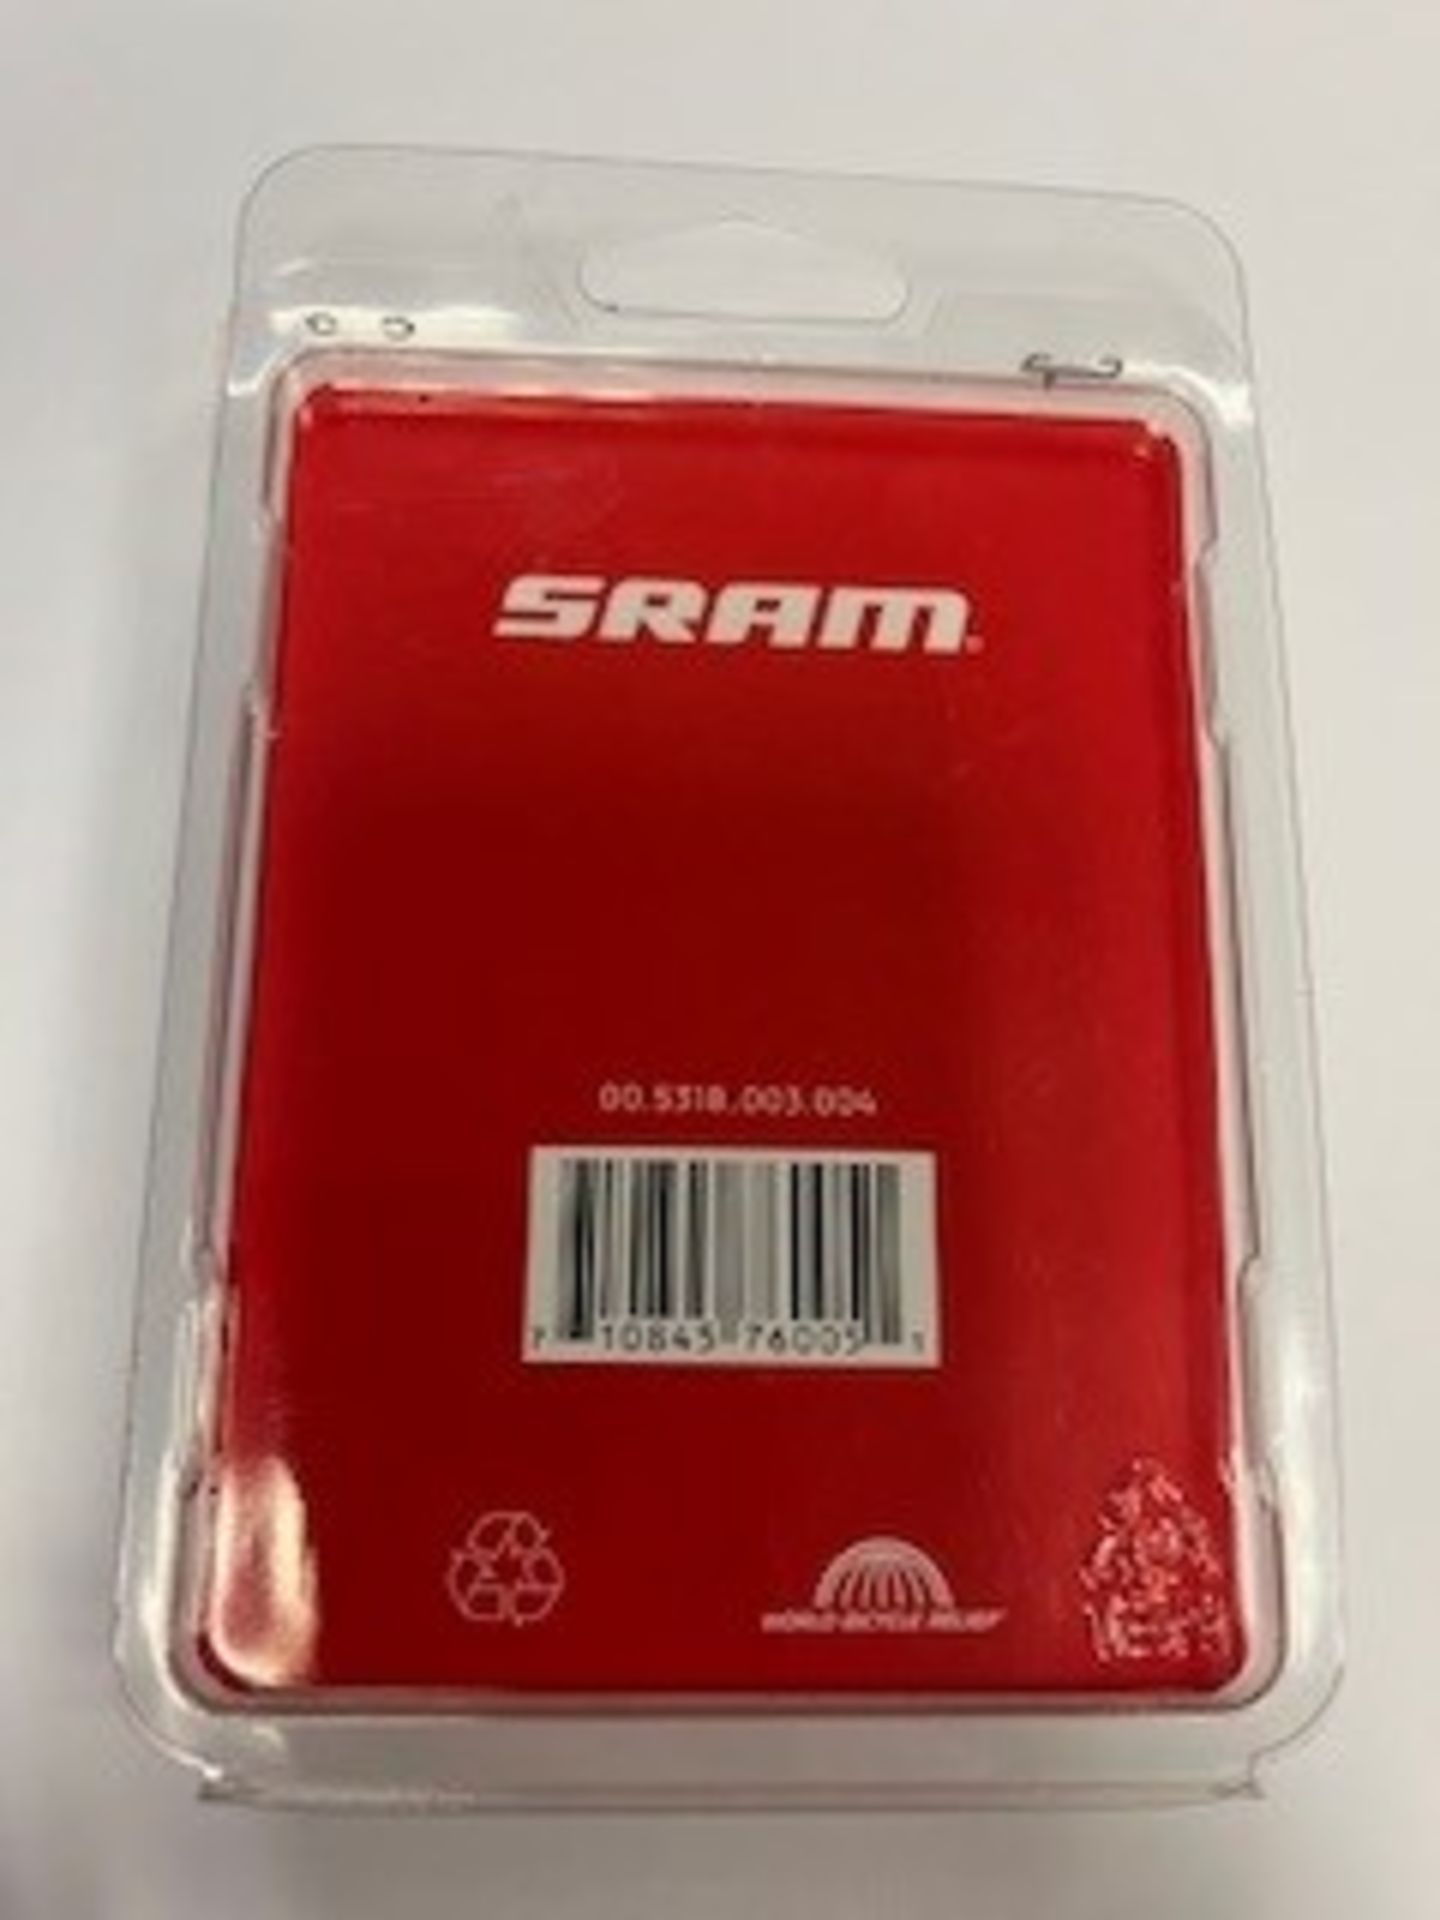 Sram Brake Pads to include 5x Disc Brake Pads Organic with Steel Backing Plate (HRD, LEVEL ULT, LEVE - Bild 4 aus 9